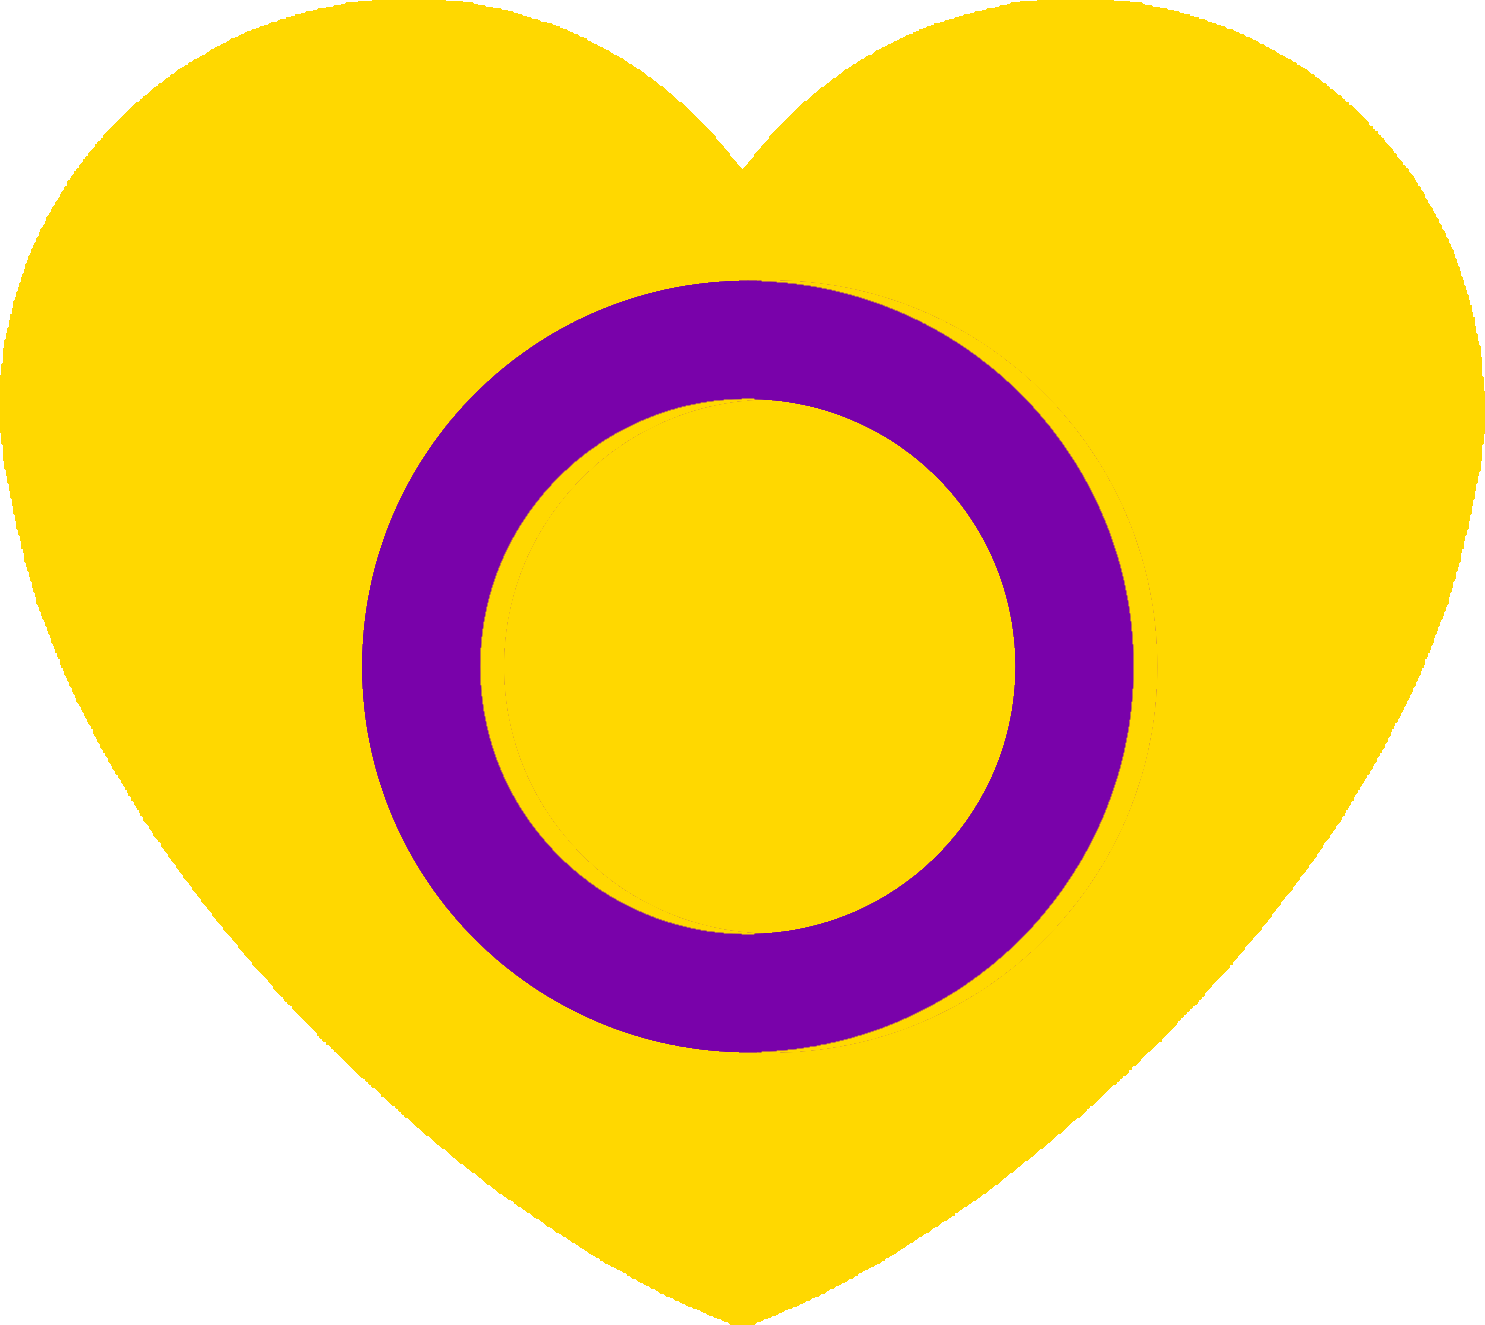 A Yellow Heart With A Purple Circle